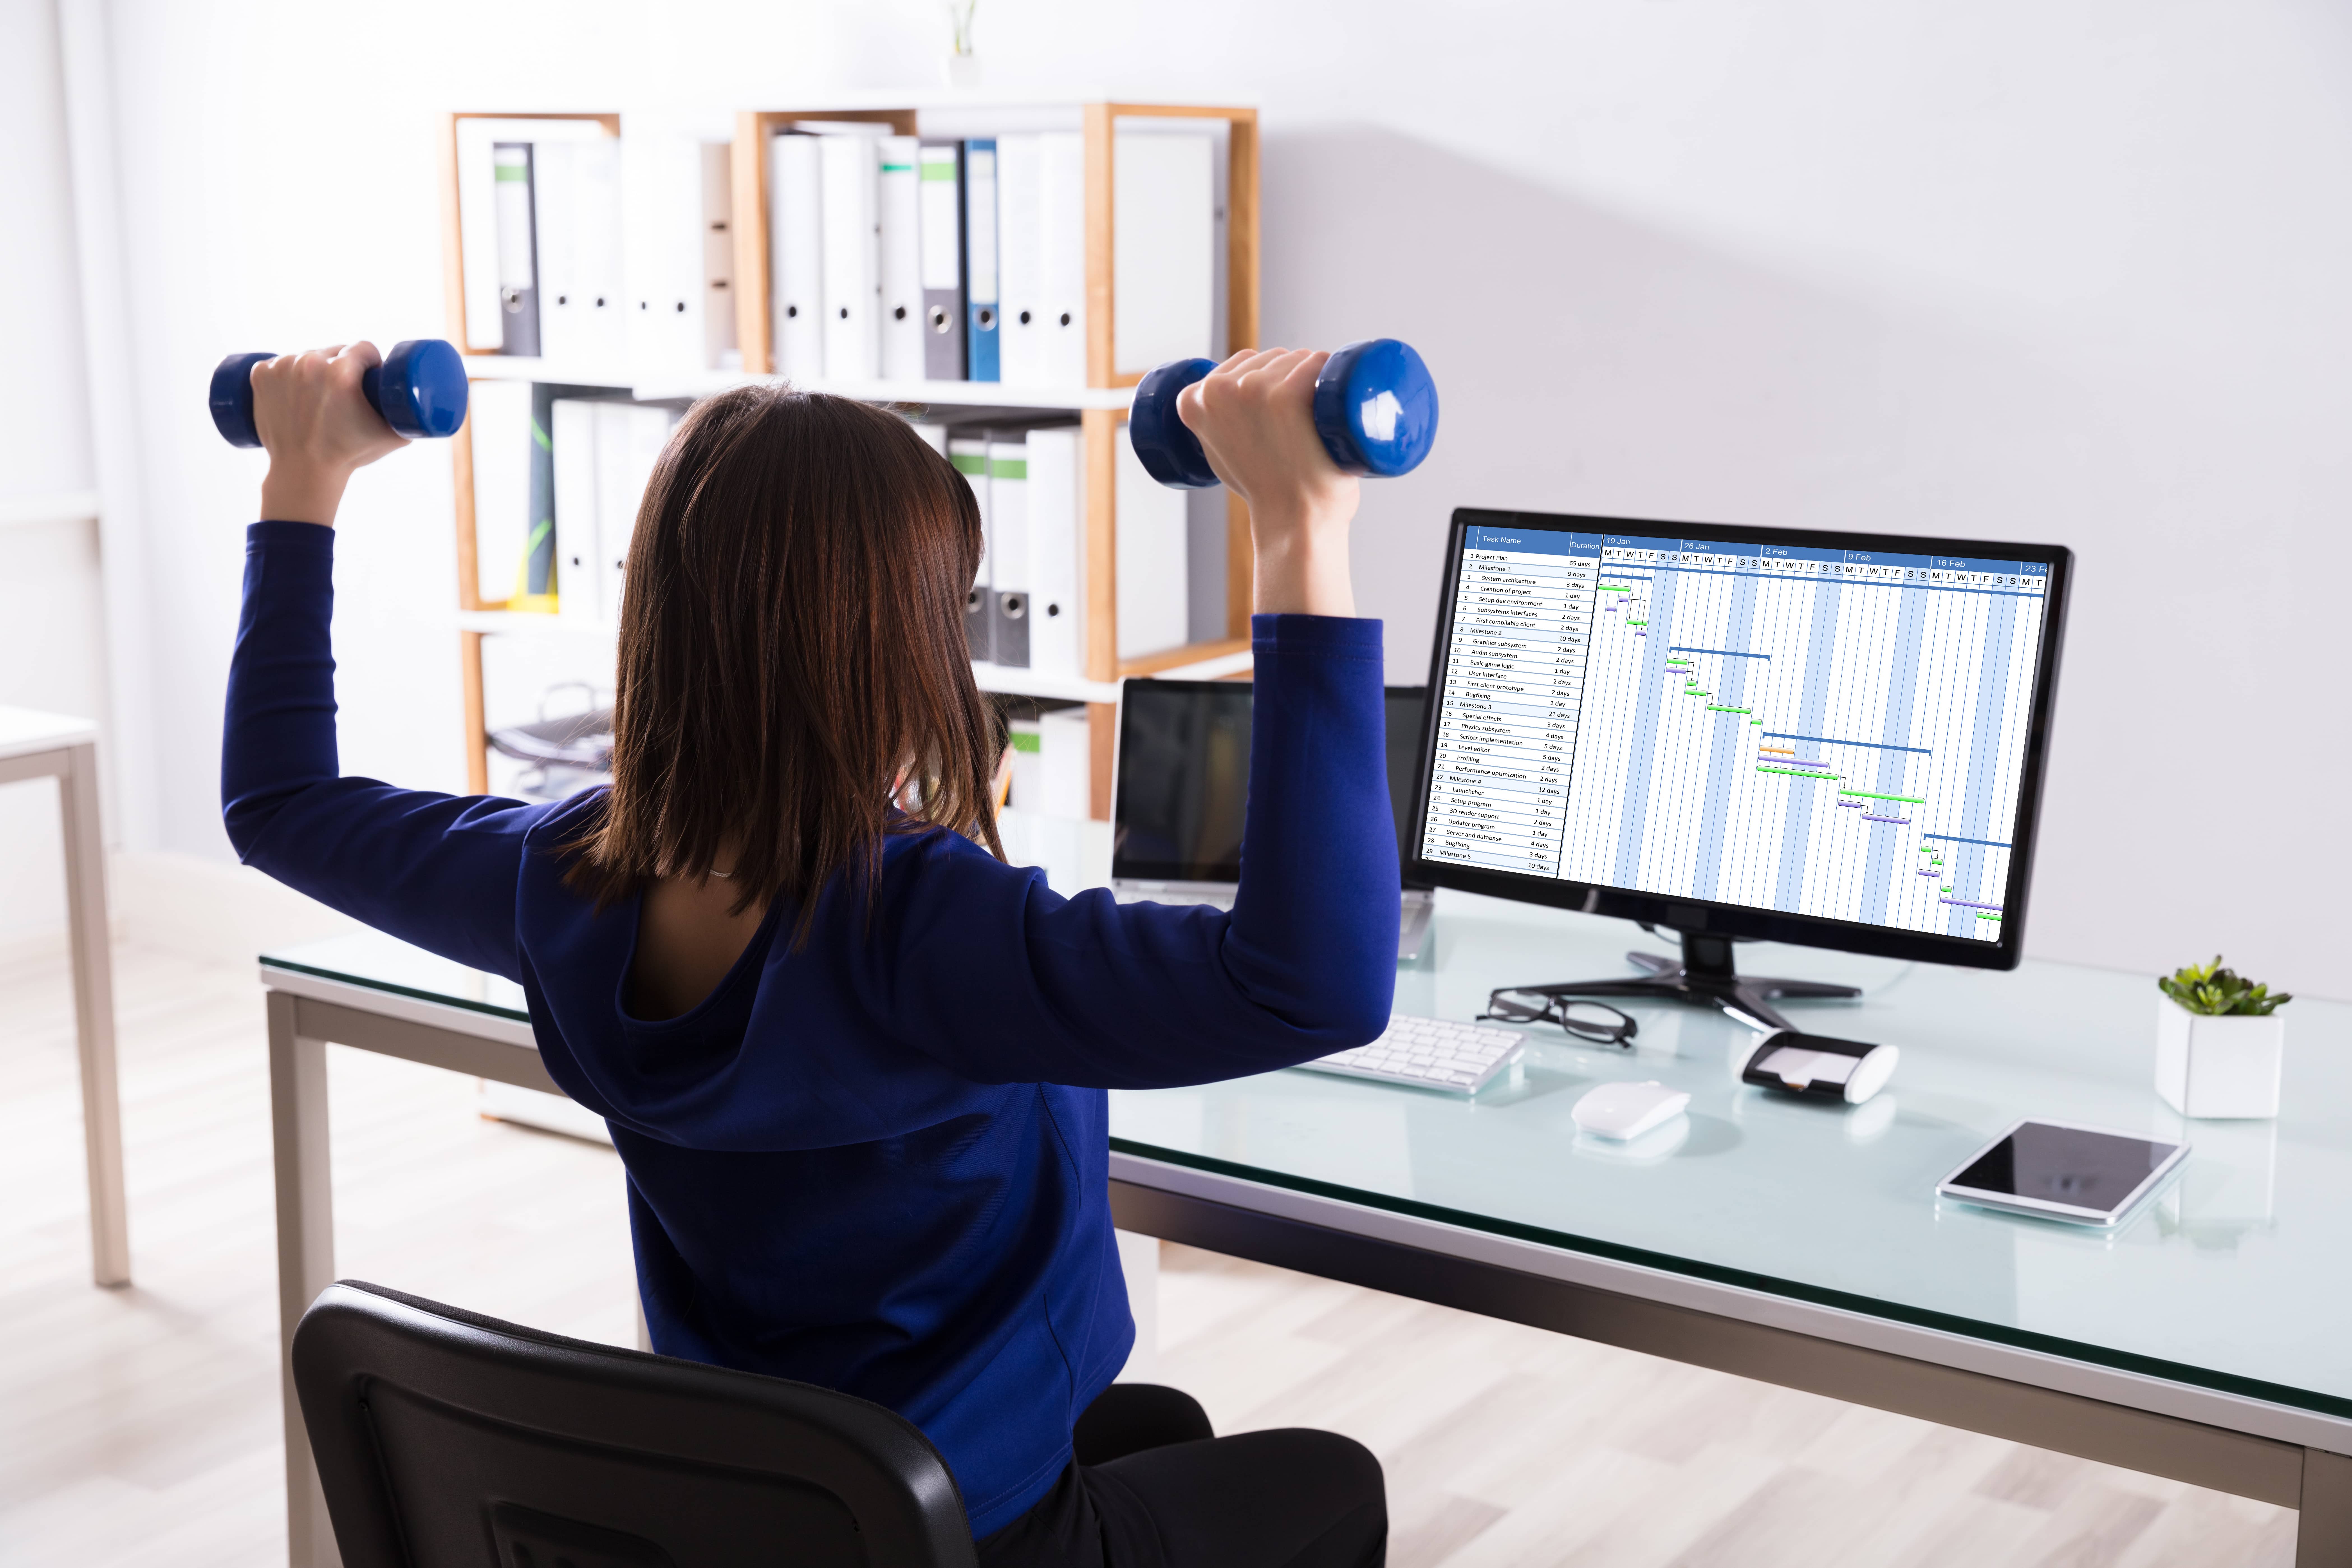 exercises you can do at your desk or work